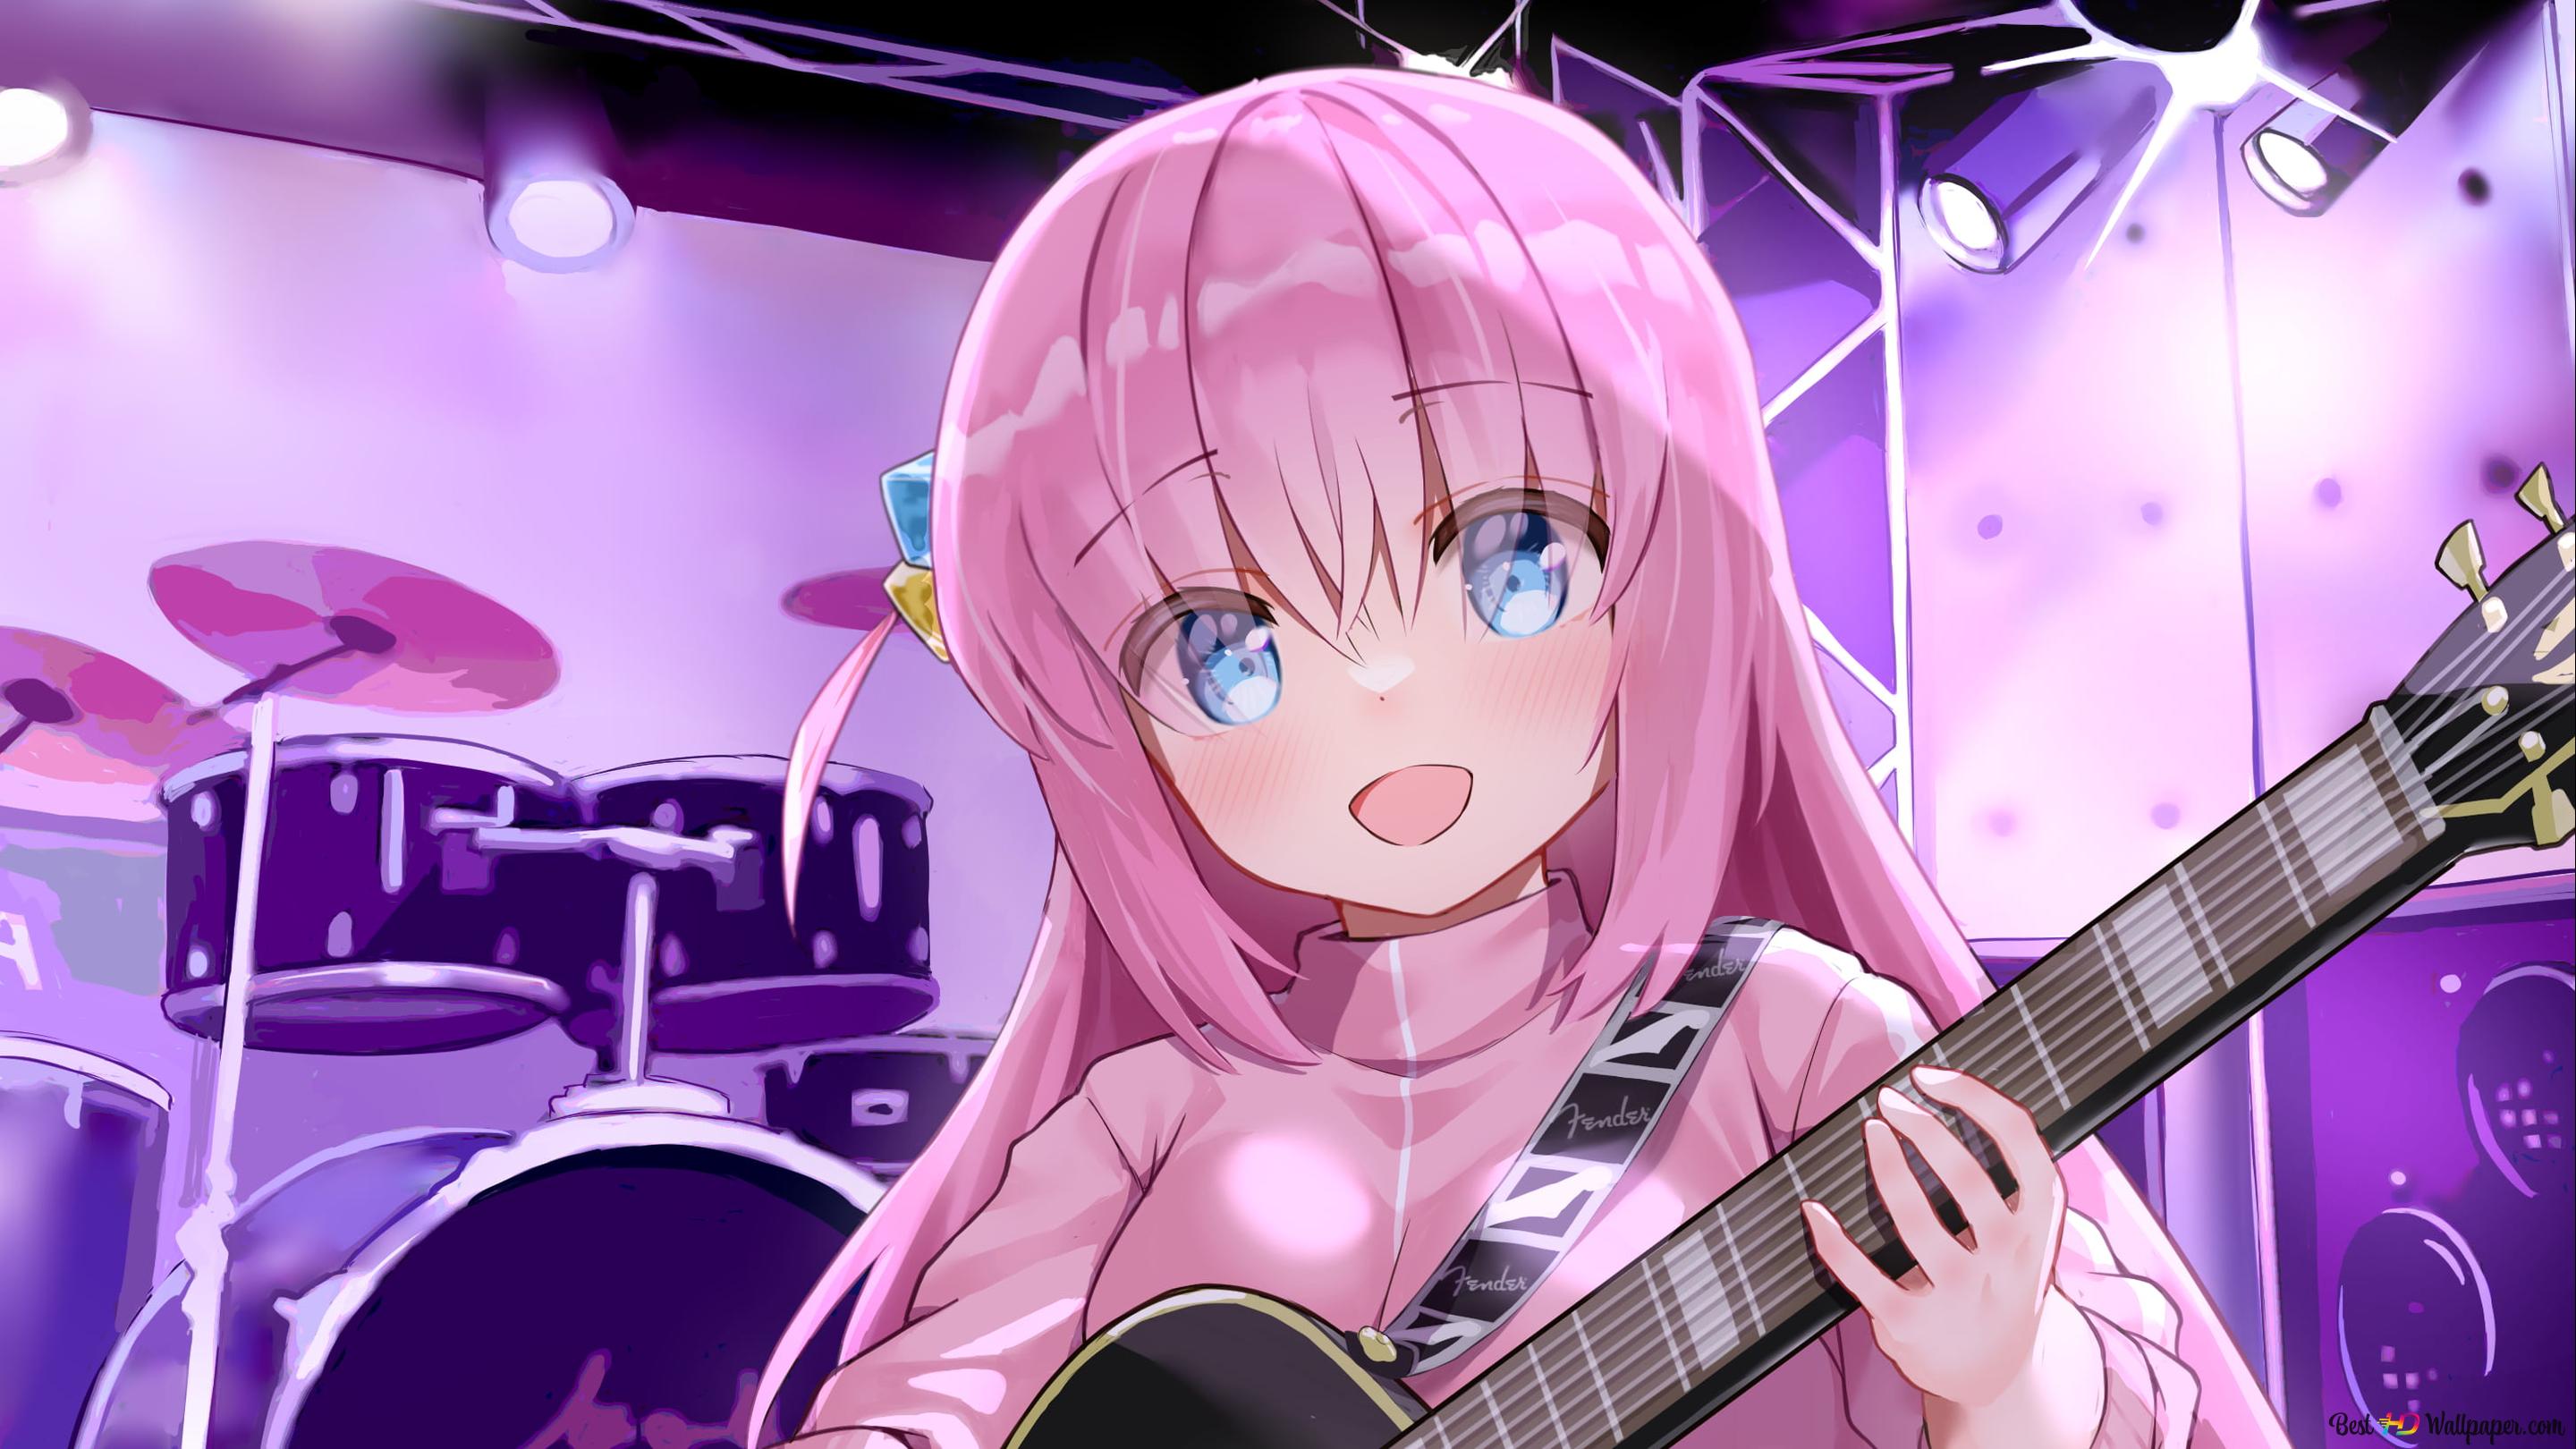 Bocchi the rock anime series pink haired girl plays the guitar k wallpaper download